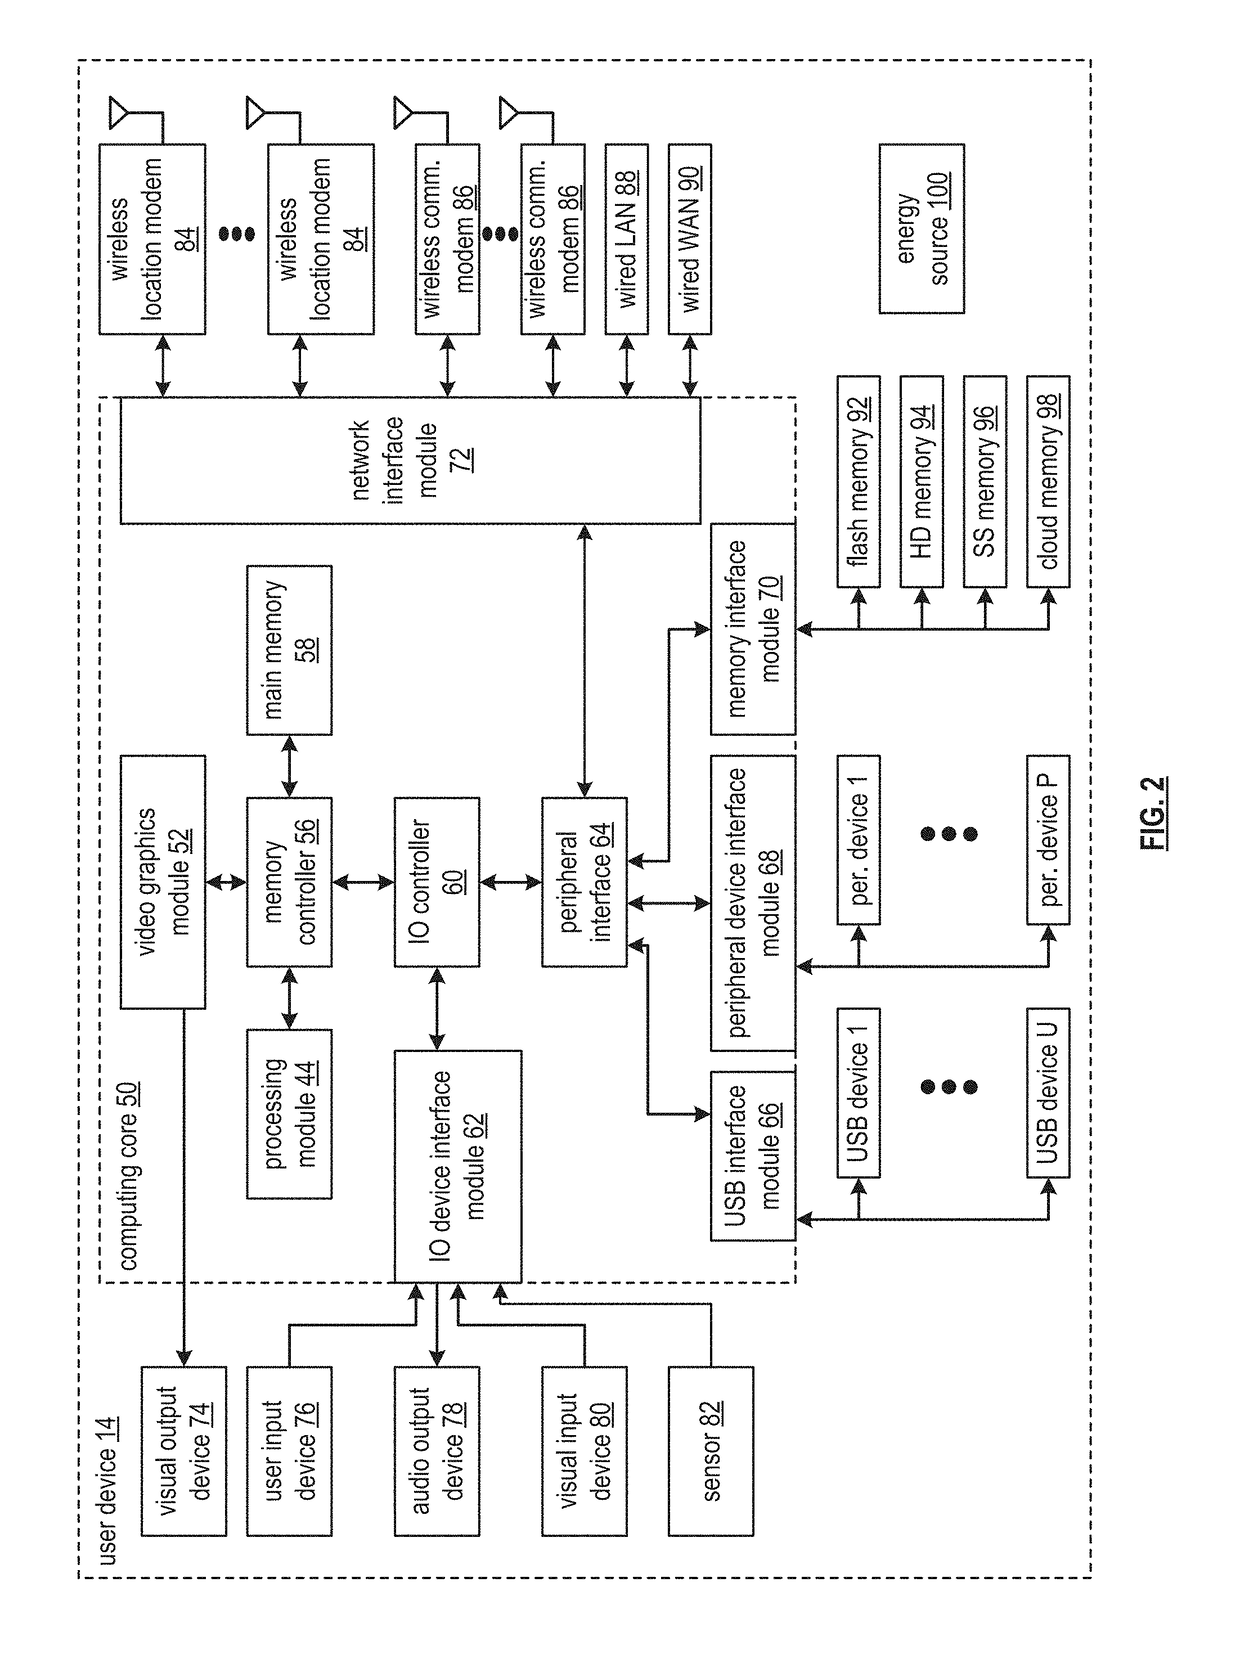 Synchronizing location status information in a computing system